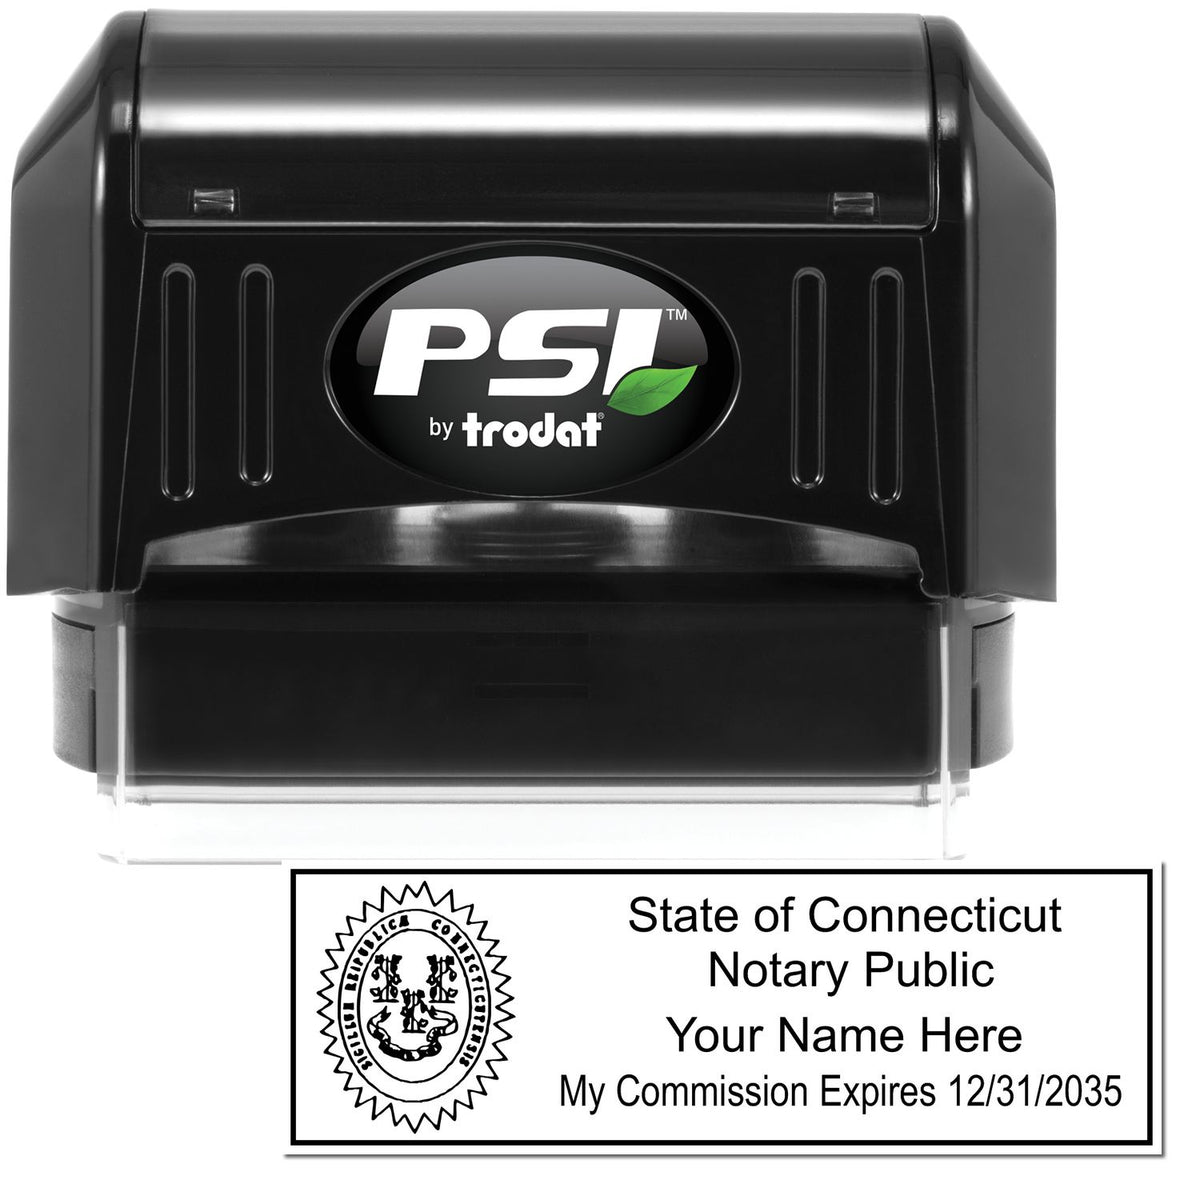 The main image for the PSI Connecticut Notary Stamp depicting a sample of the imprint and electronic files